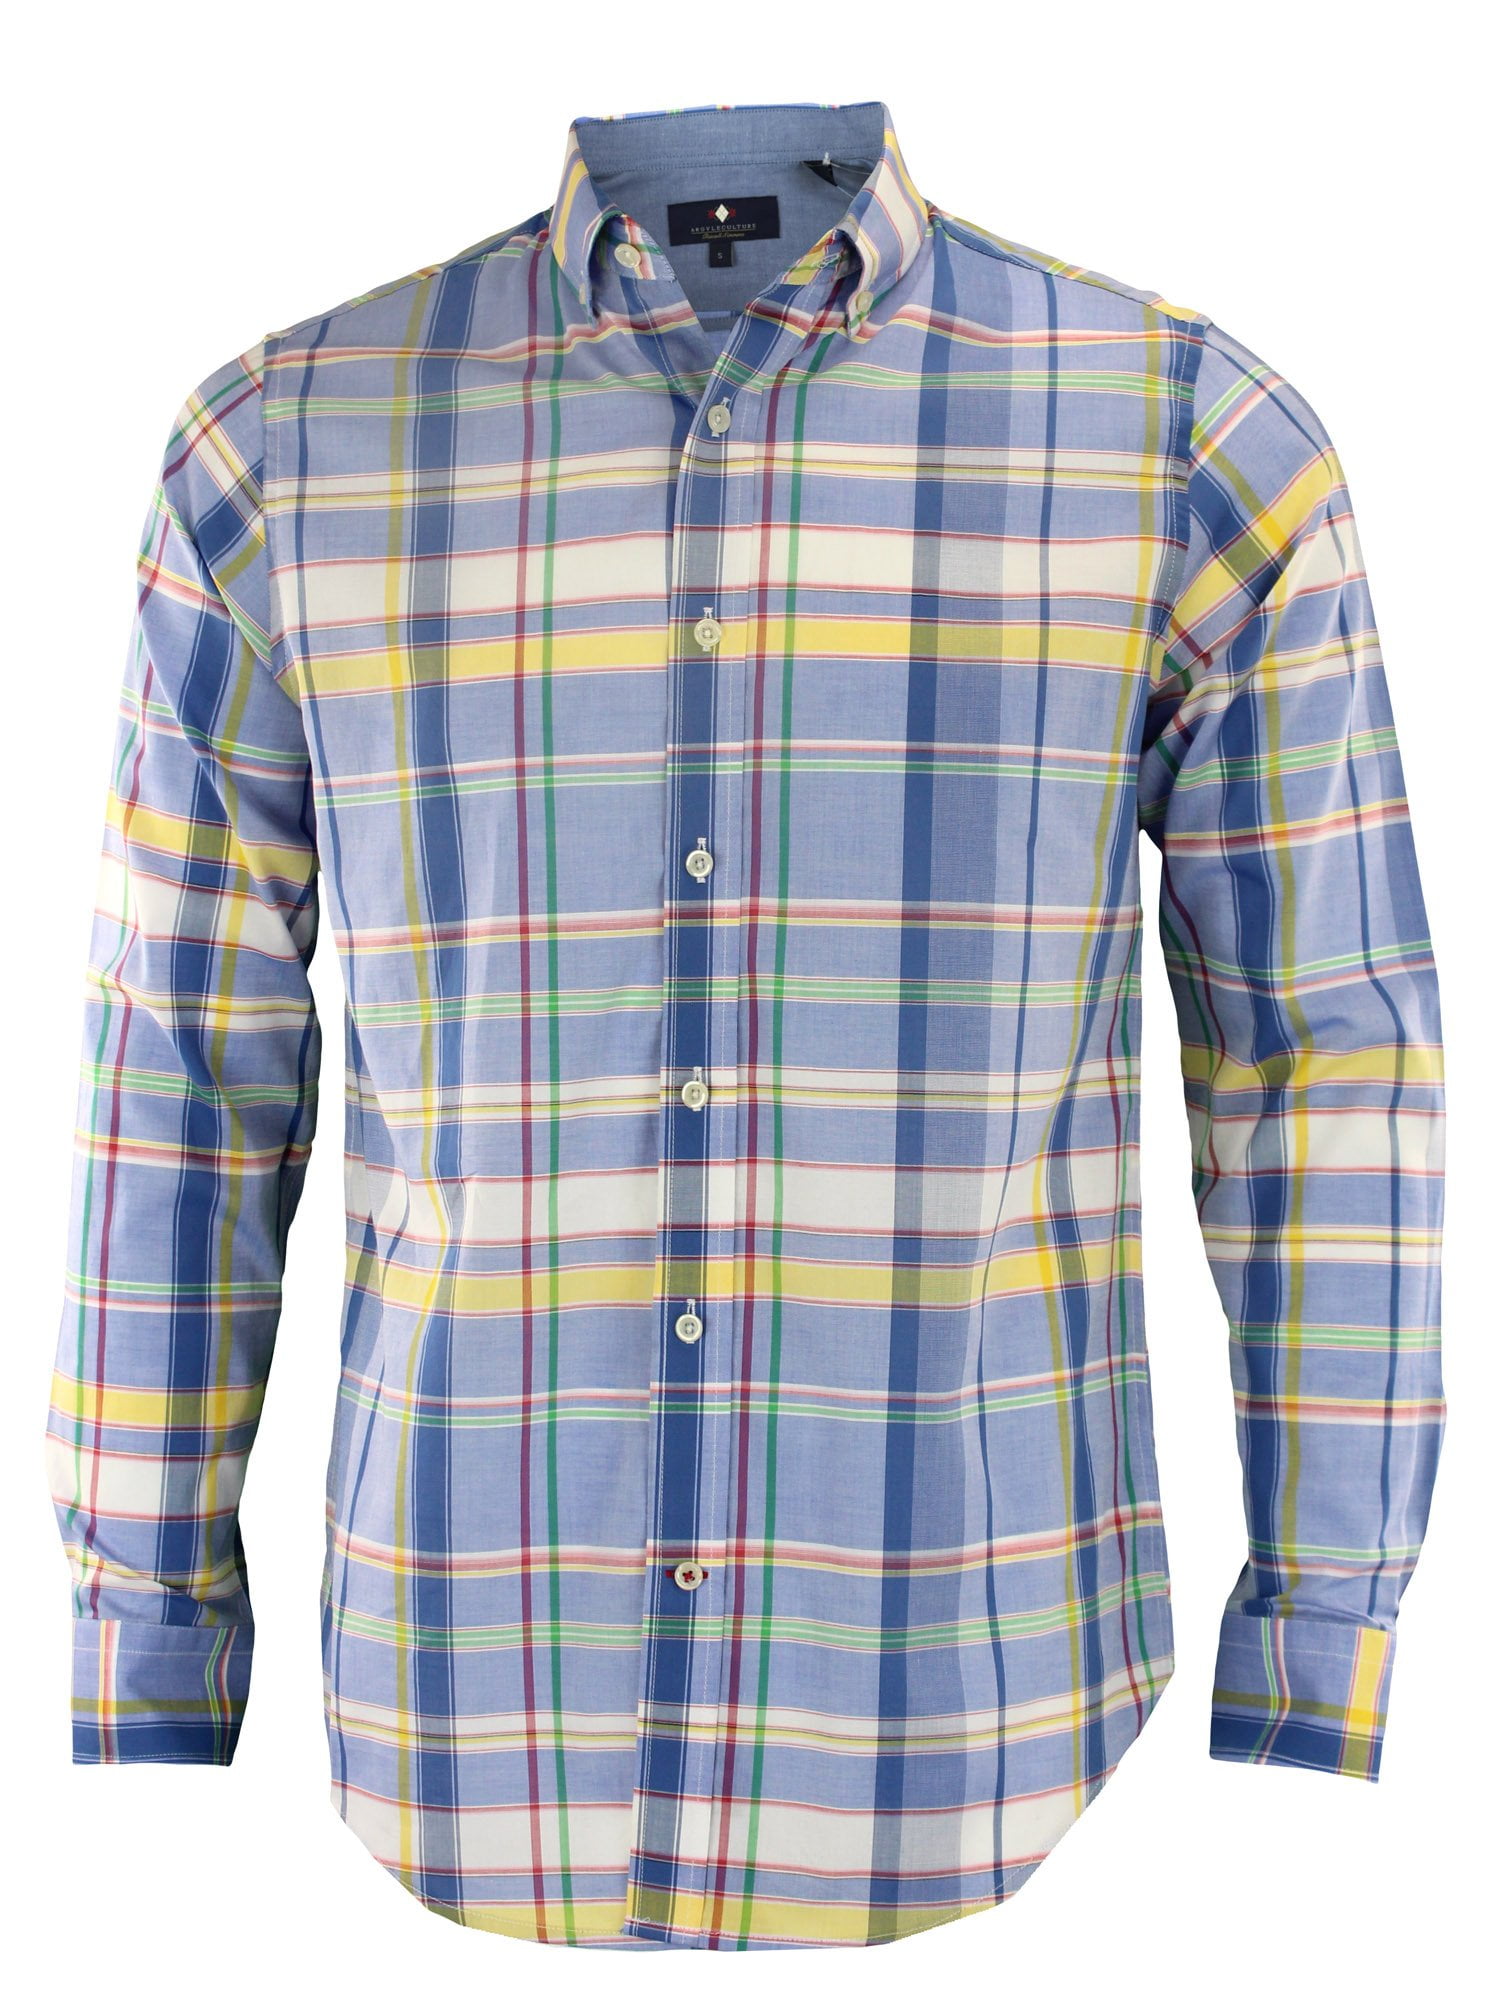 Navy & Yellow Plaid Shirt Made in the UK Blue Size 15 & 16 Details about   Smyth & Gibson 